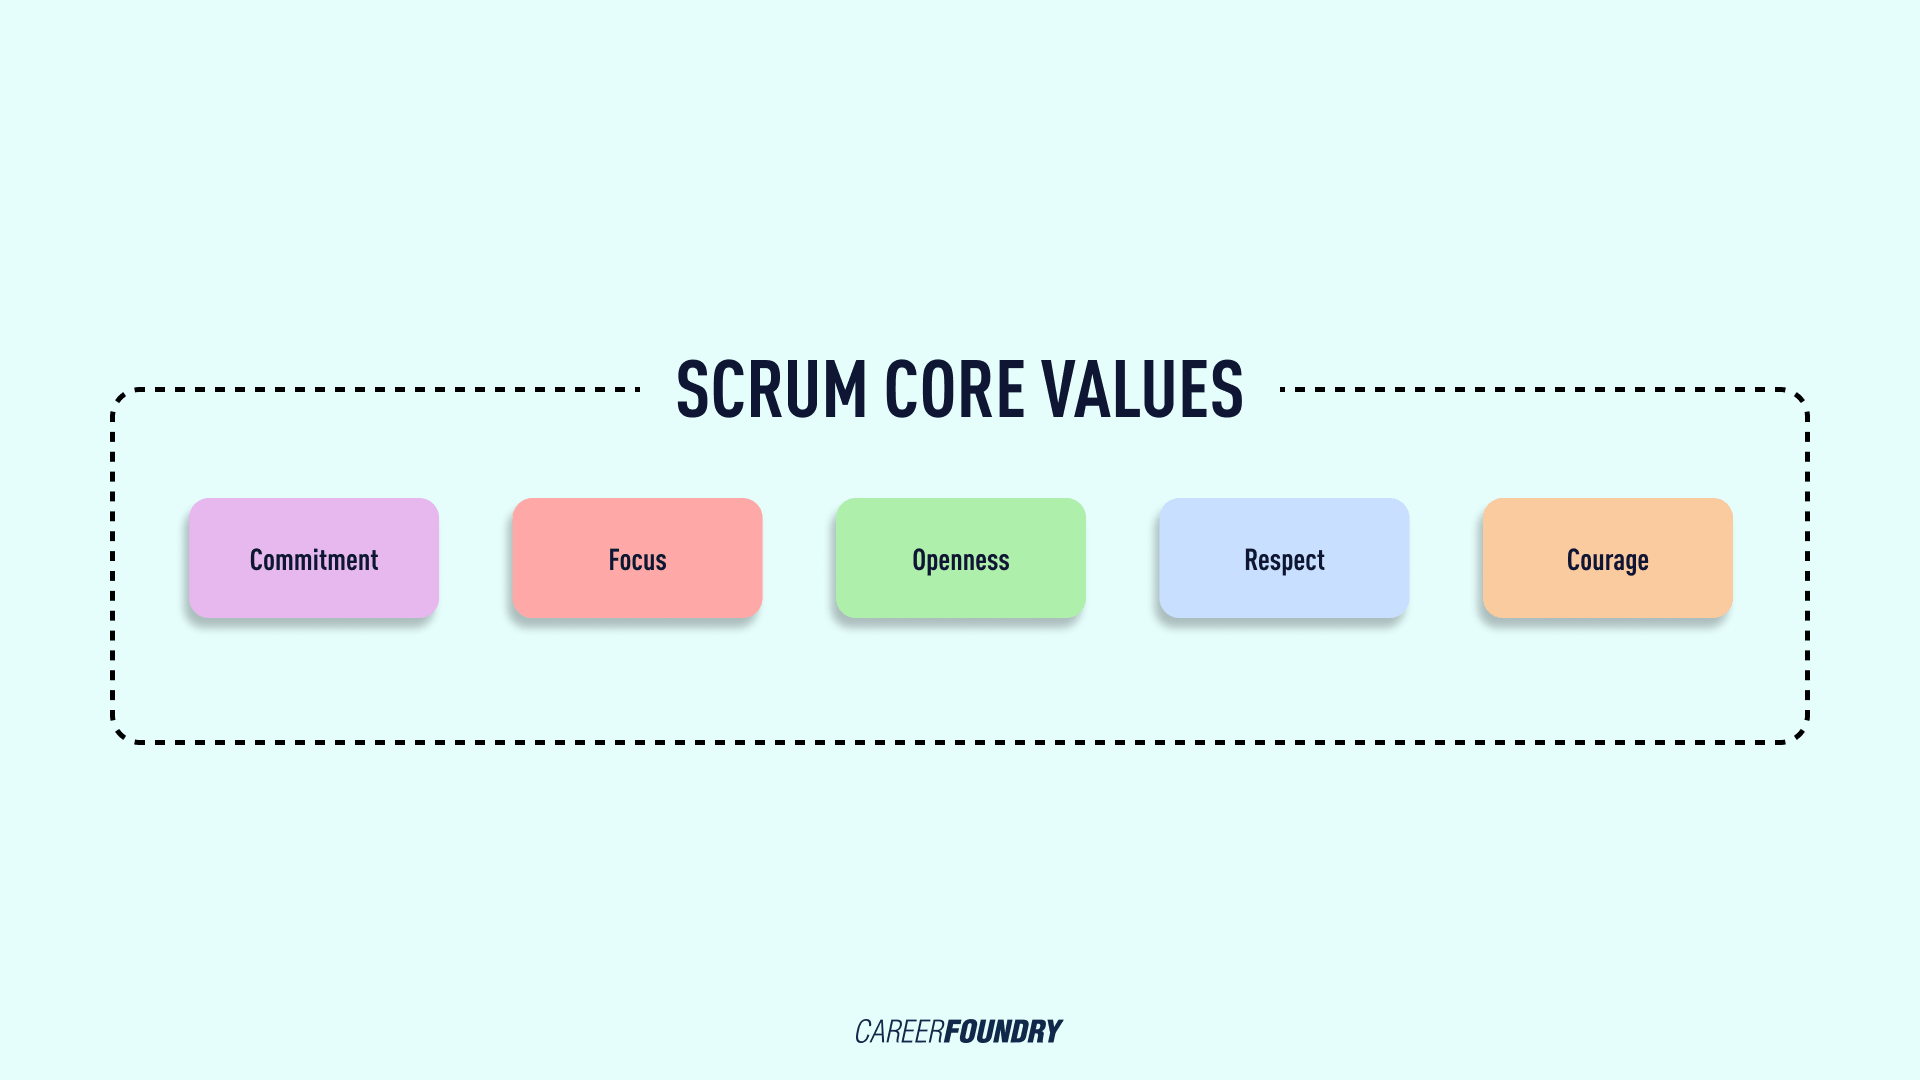 A graphic showing the 5 Scrum core values: Commitment, Focus, Openness, Respect, and Courage.